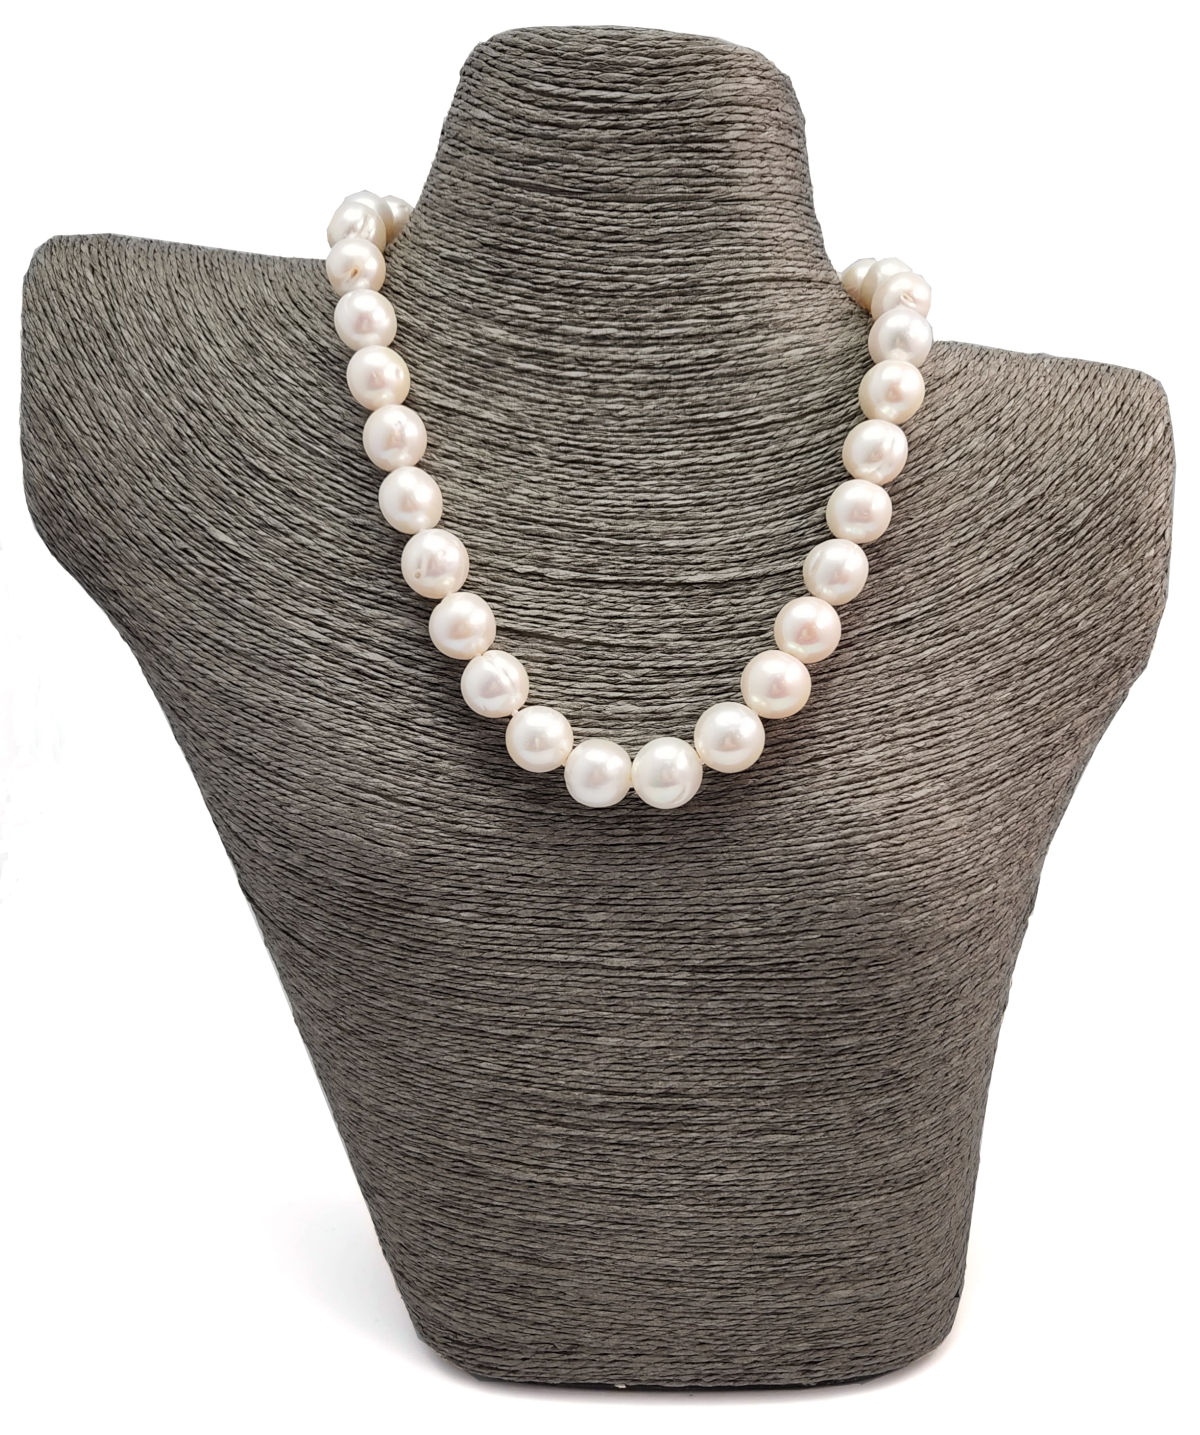 Large Pearl necklace -each pearl measures 12.5 MM to 15 MM